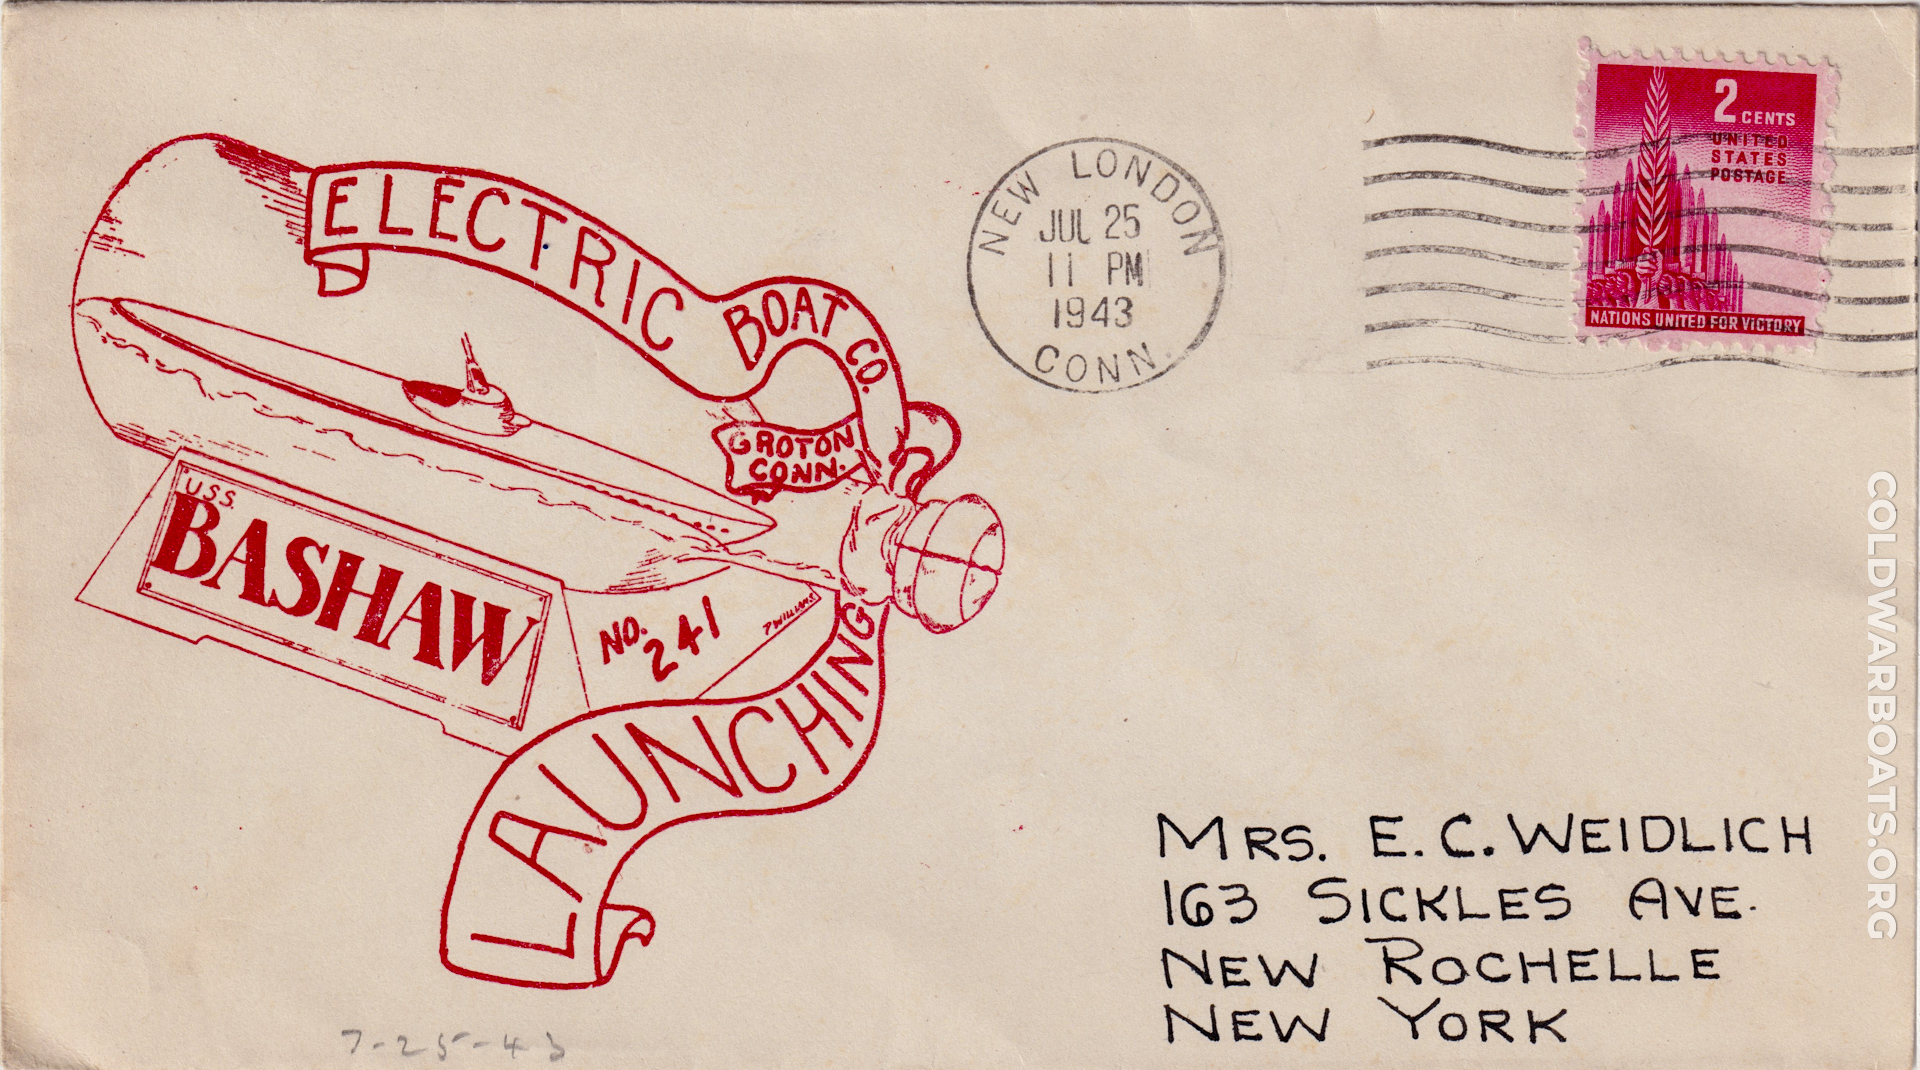 Cover commemorating the launching of the USS BASHAW (SS 241) on 25 JUL 1943.